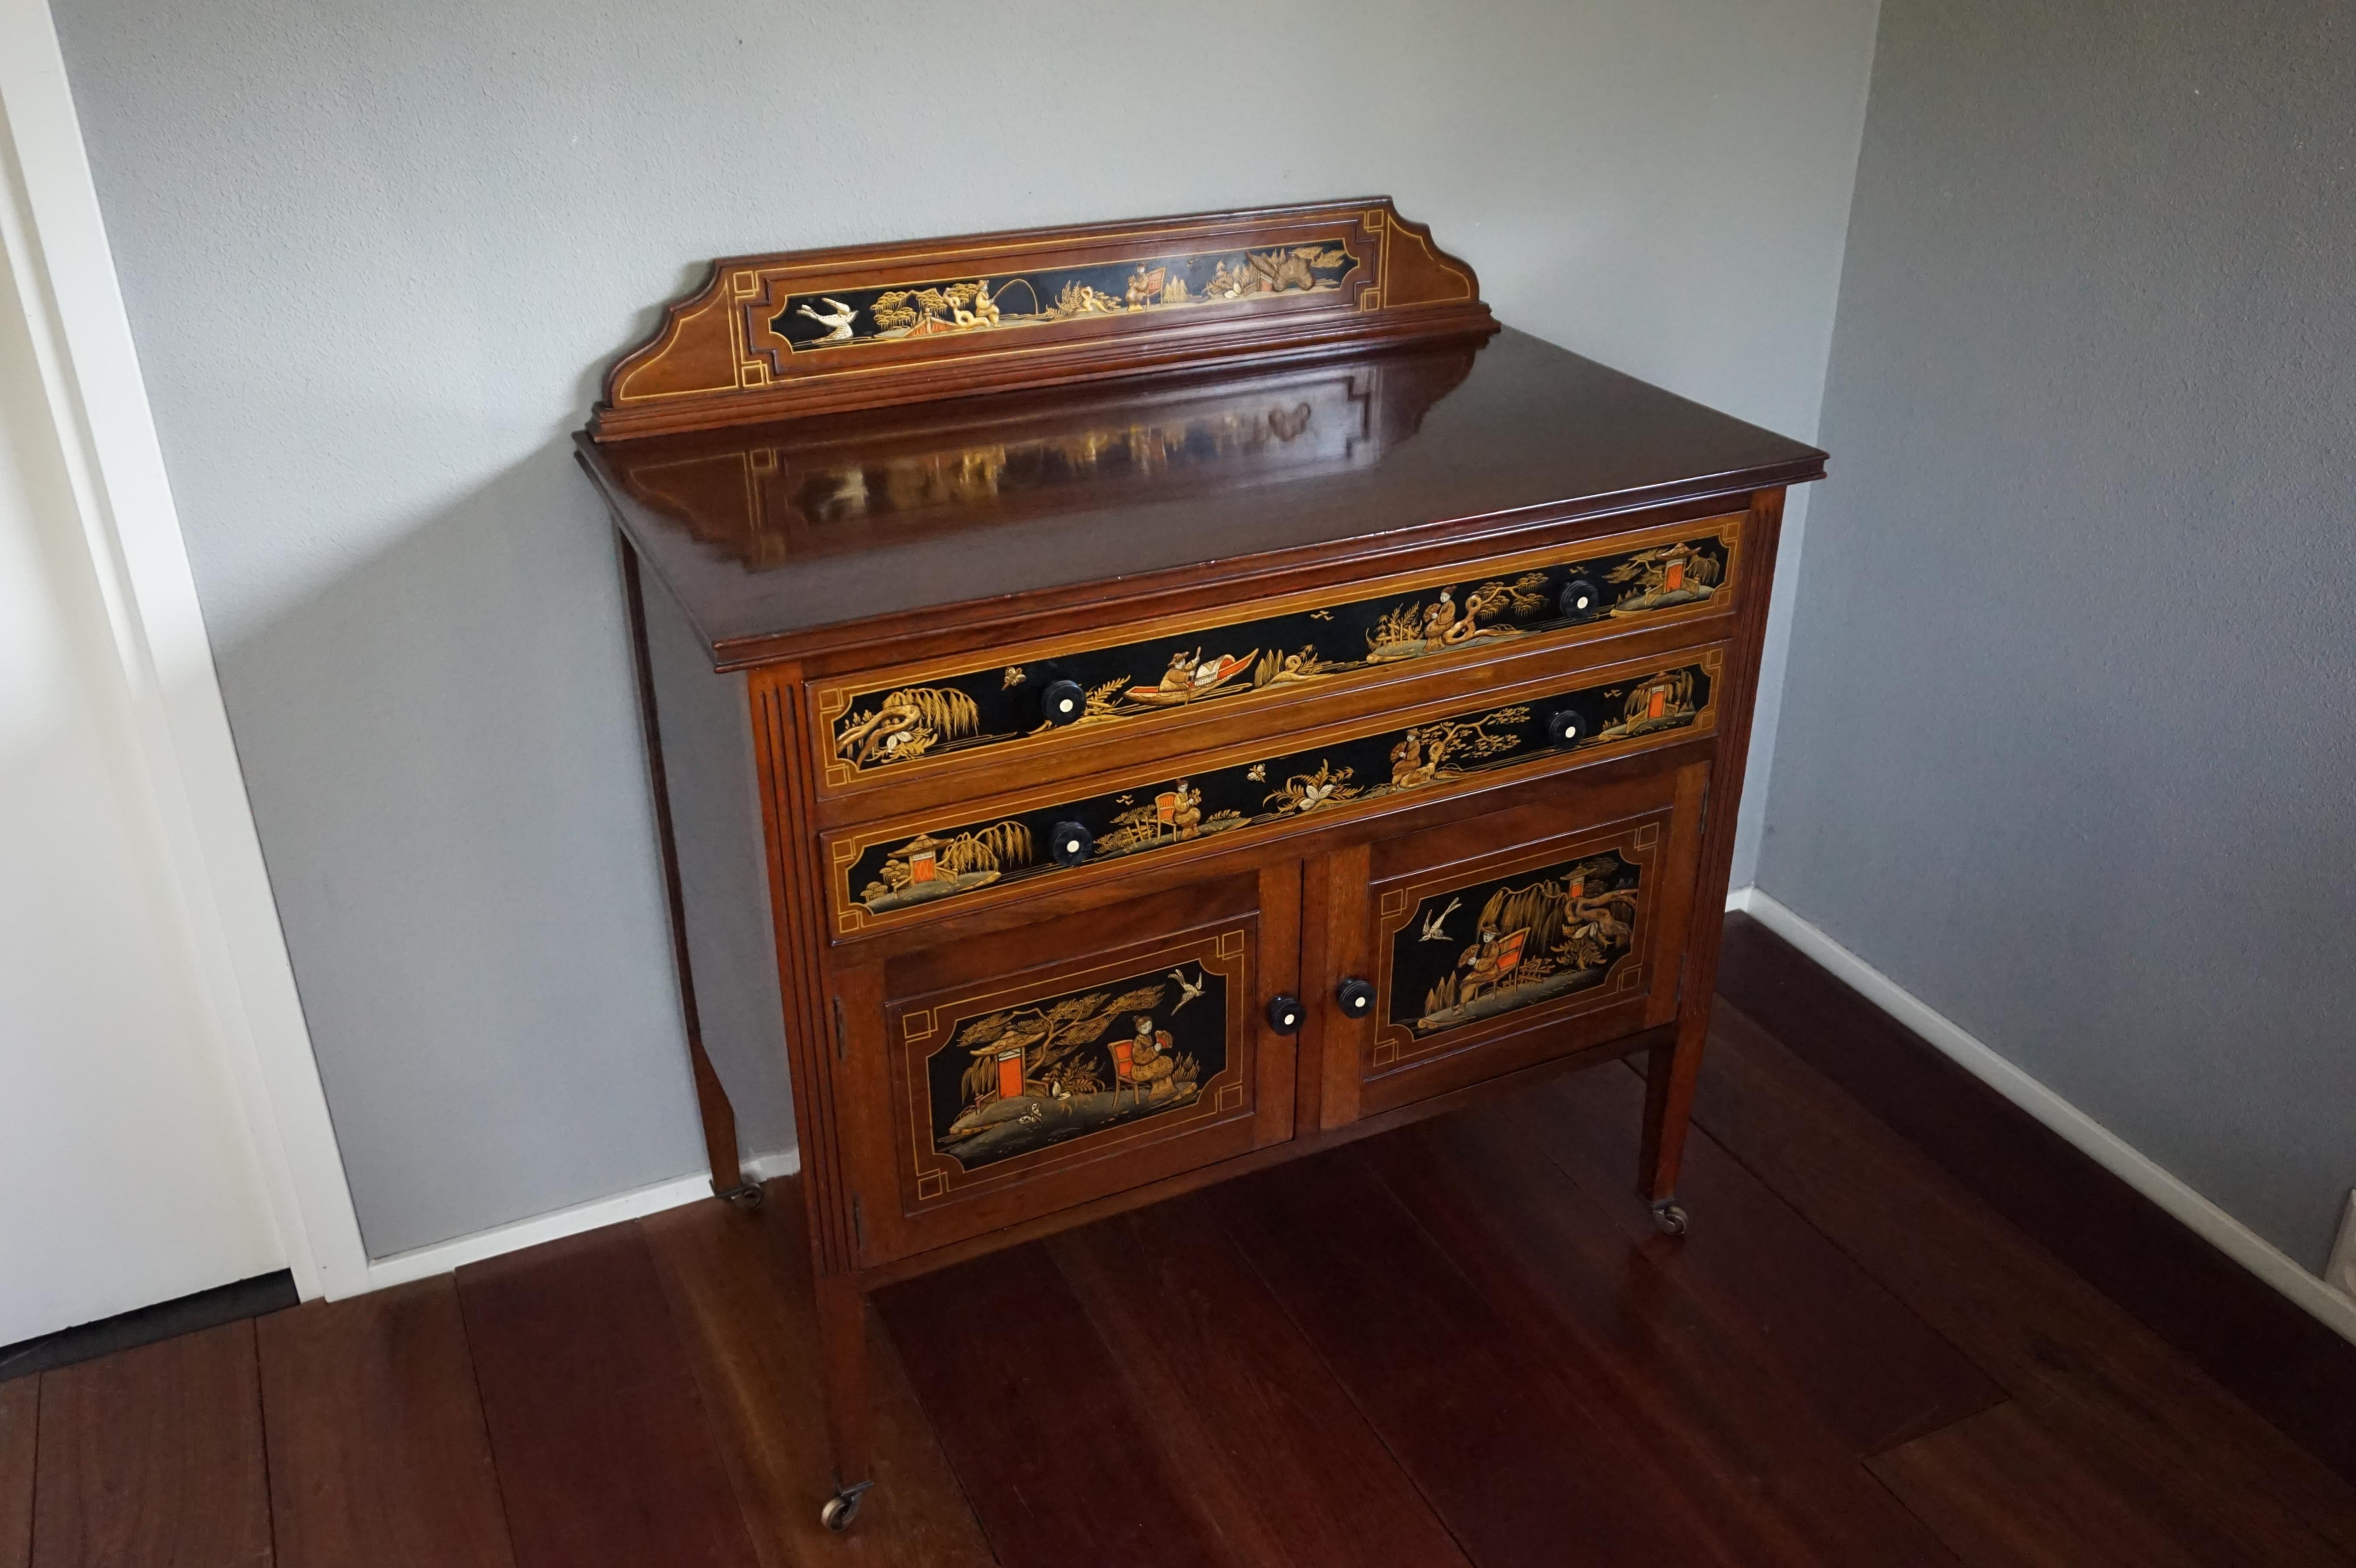 Antique & Hand-Painted, Mahogany Dresser / Commode in Stunning Chinoiserie Style 4